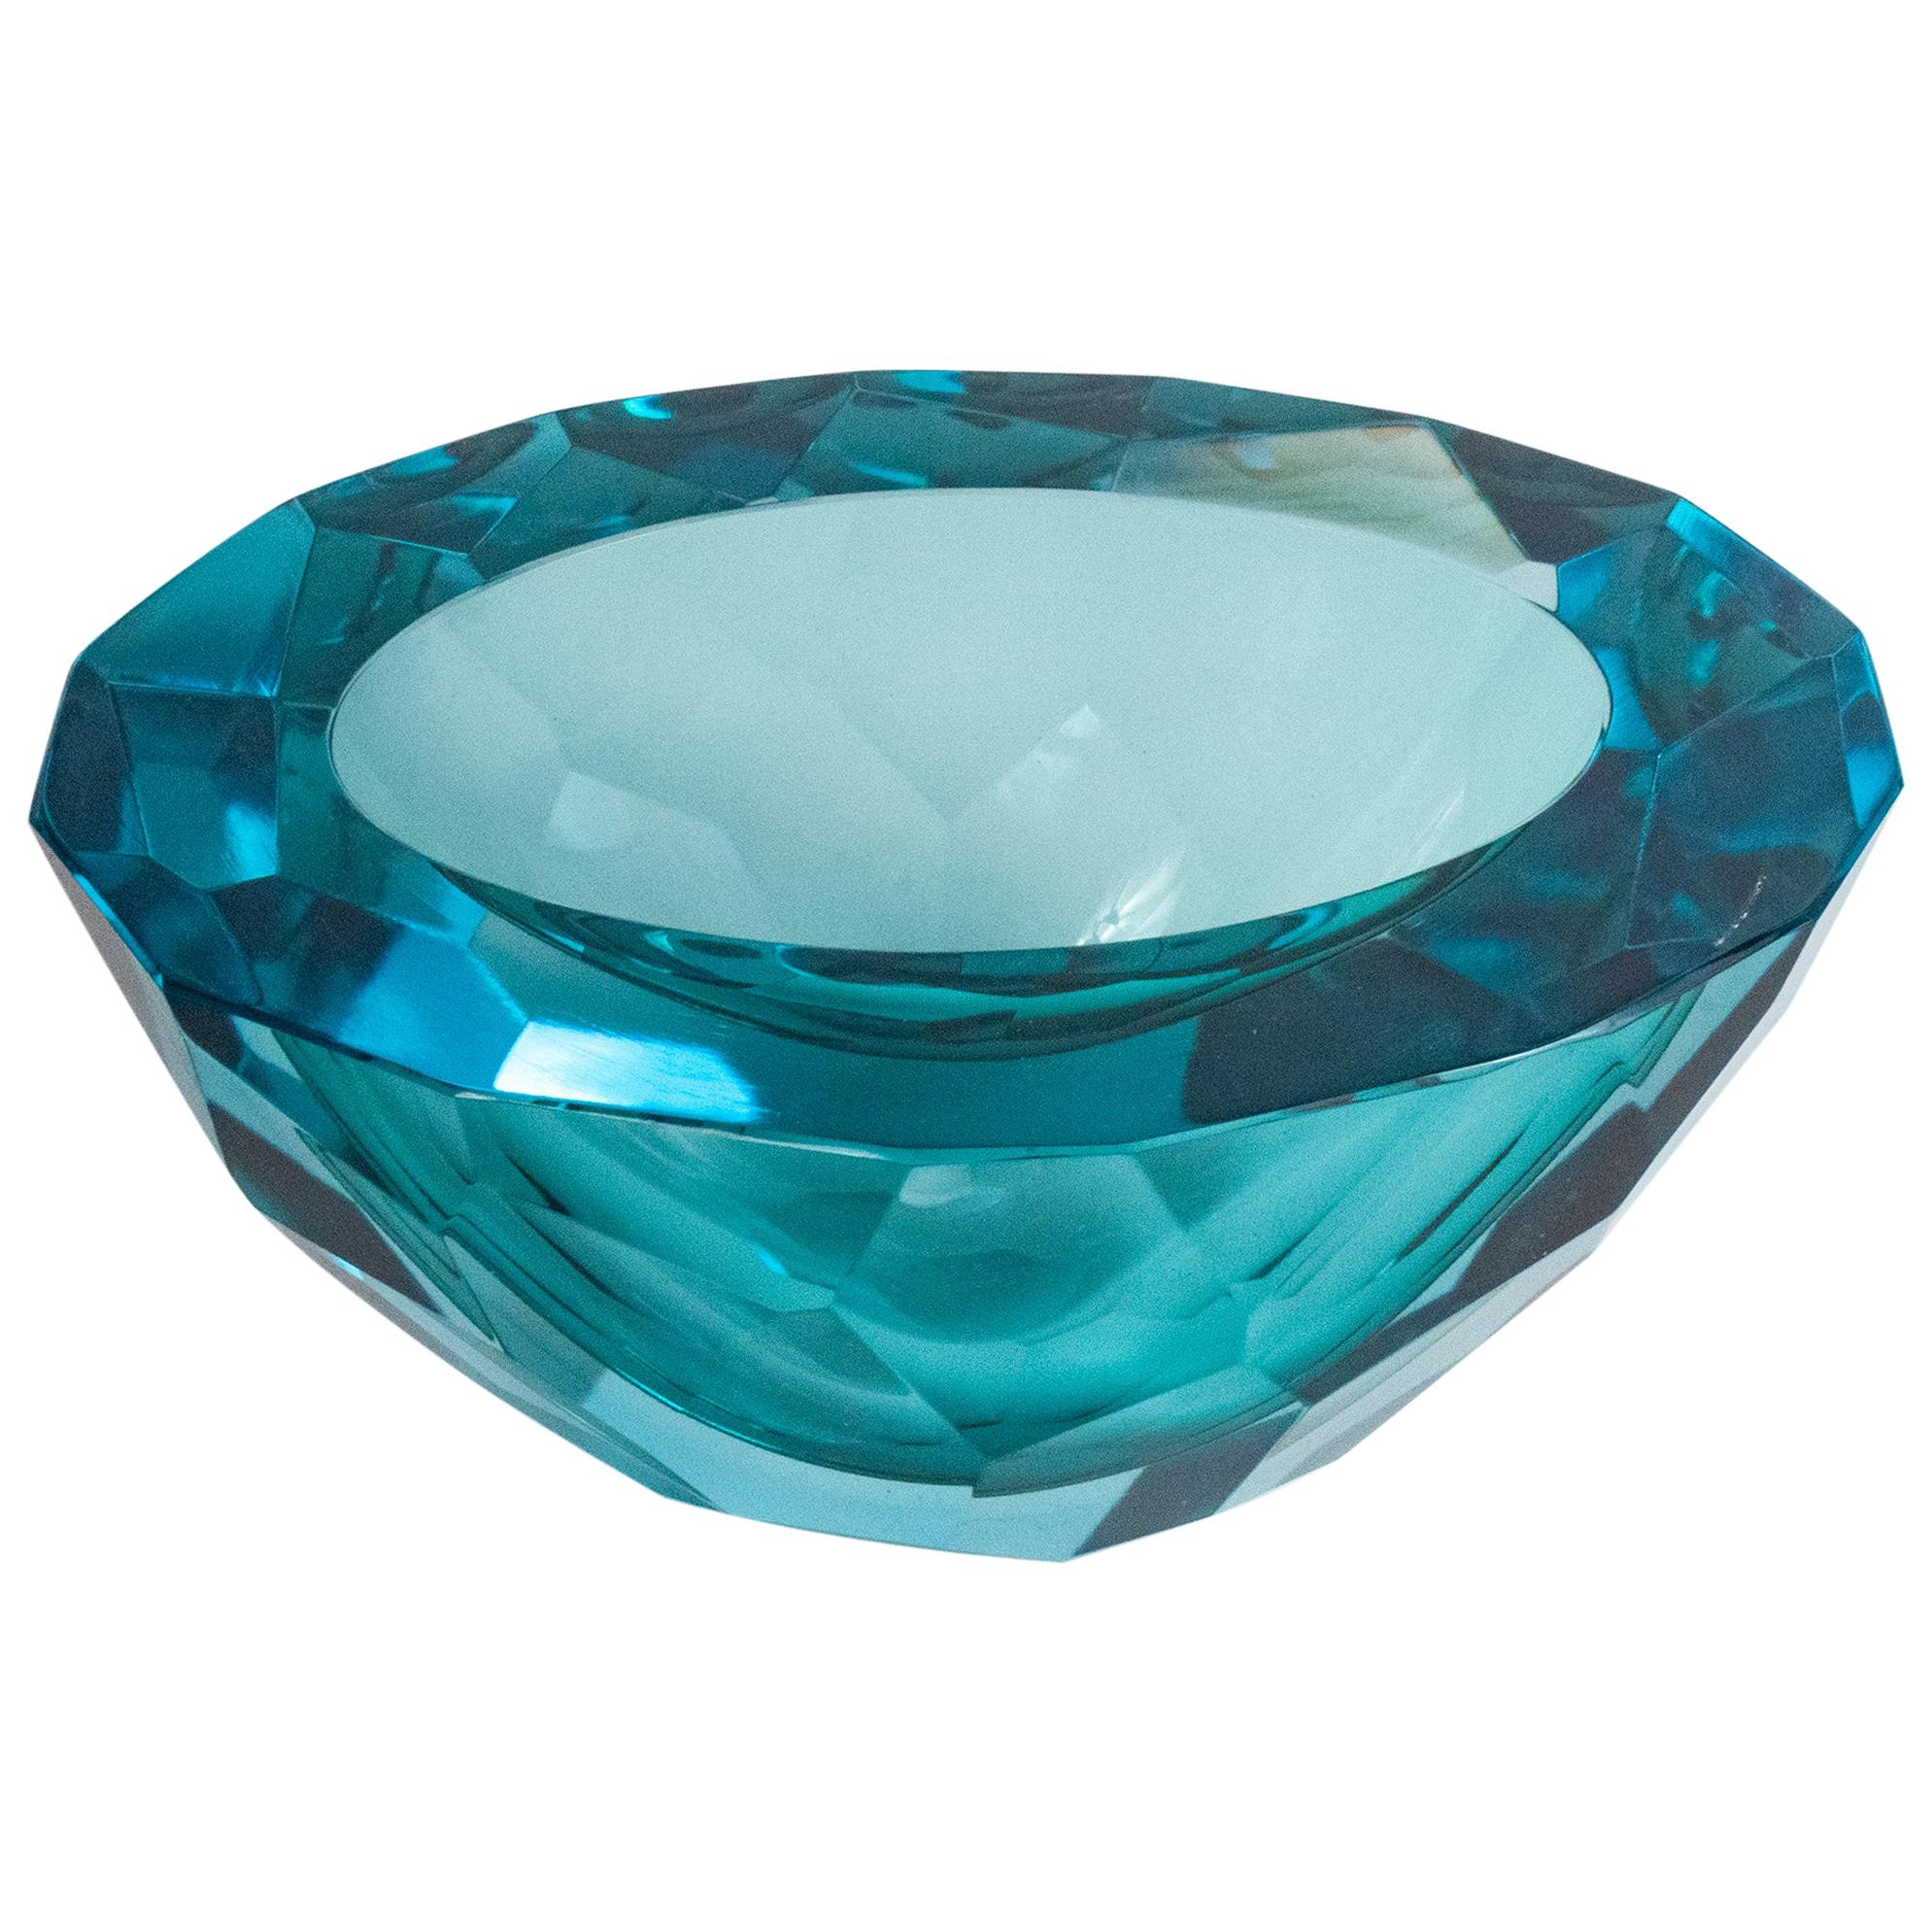 Diamond Faceted Murano Blue Glass Bowl, 1070s